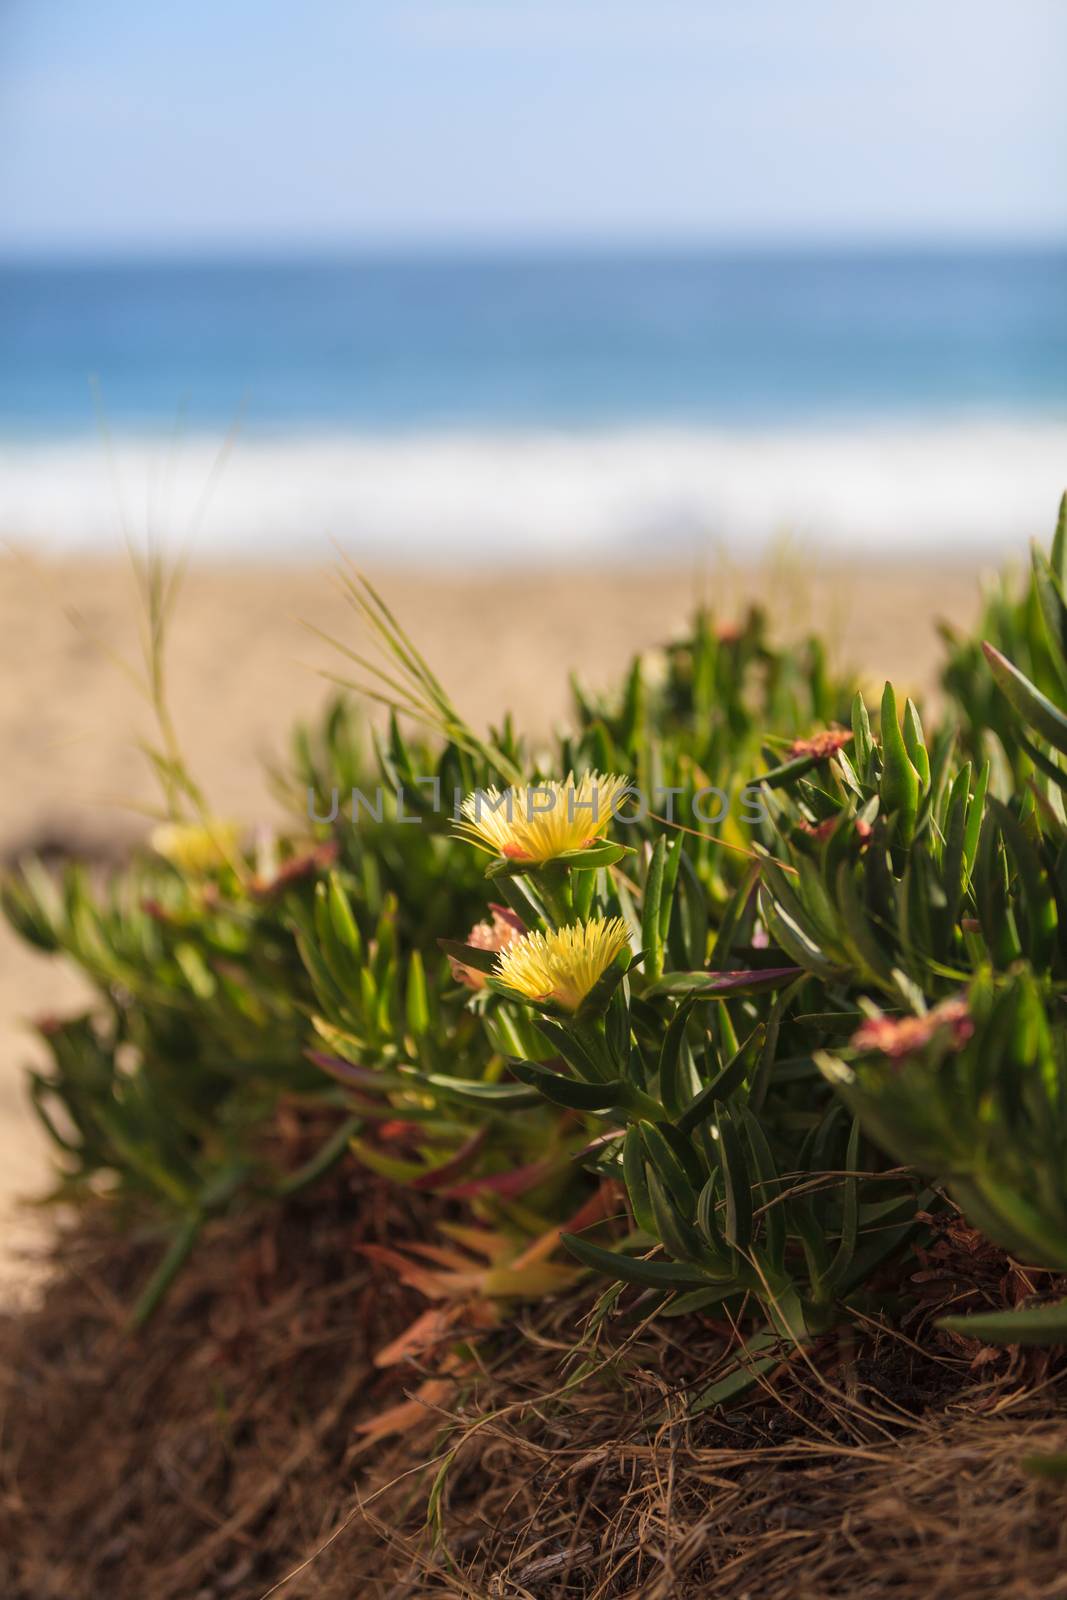 Ice plant succulent, Carpobrotus edulis, creeping ground cover on beach sand in the spring in Southern California with the ocean in the background